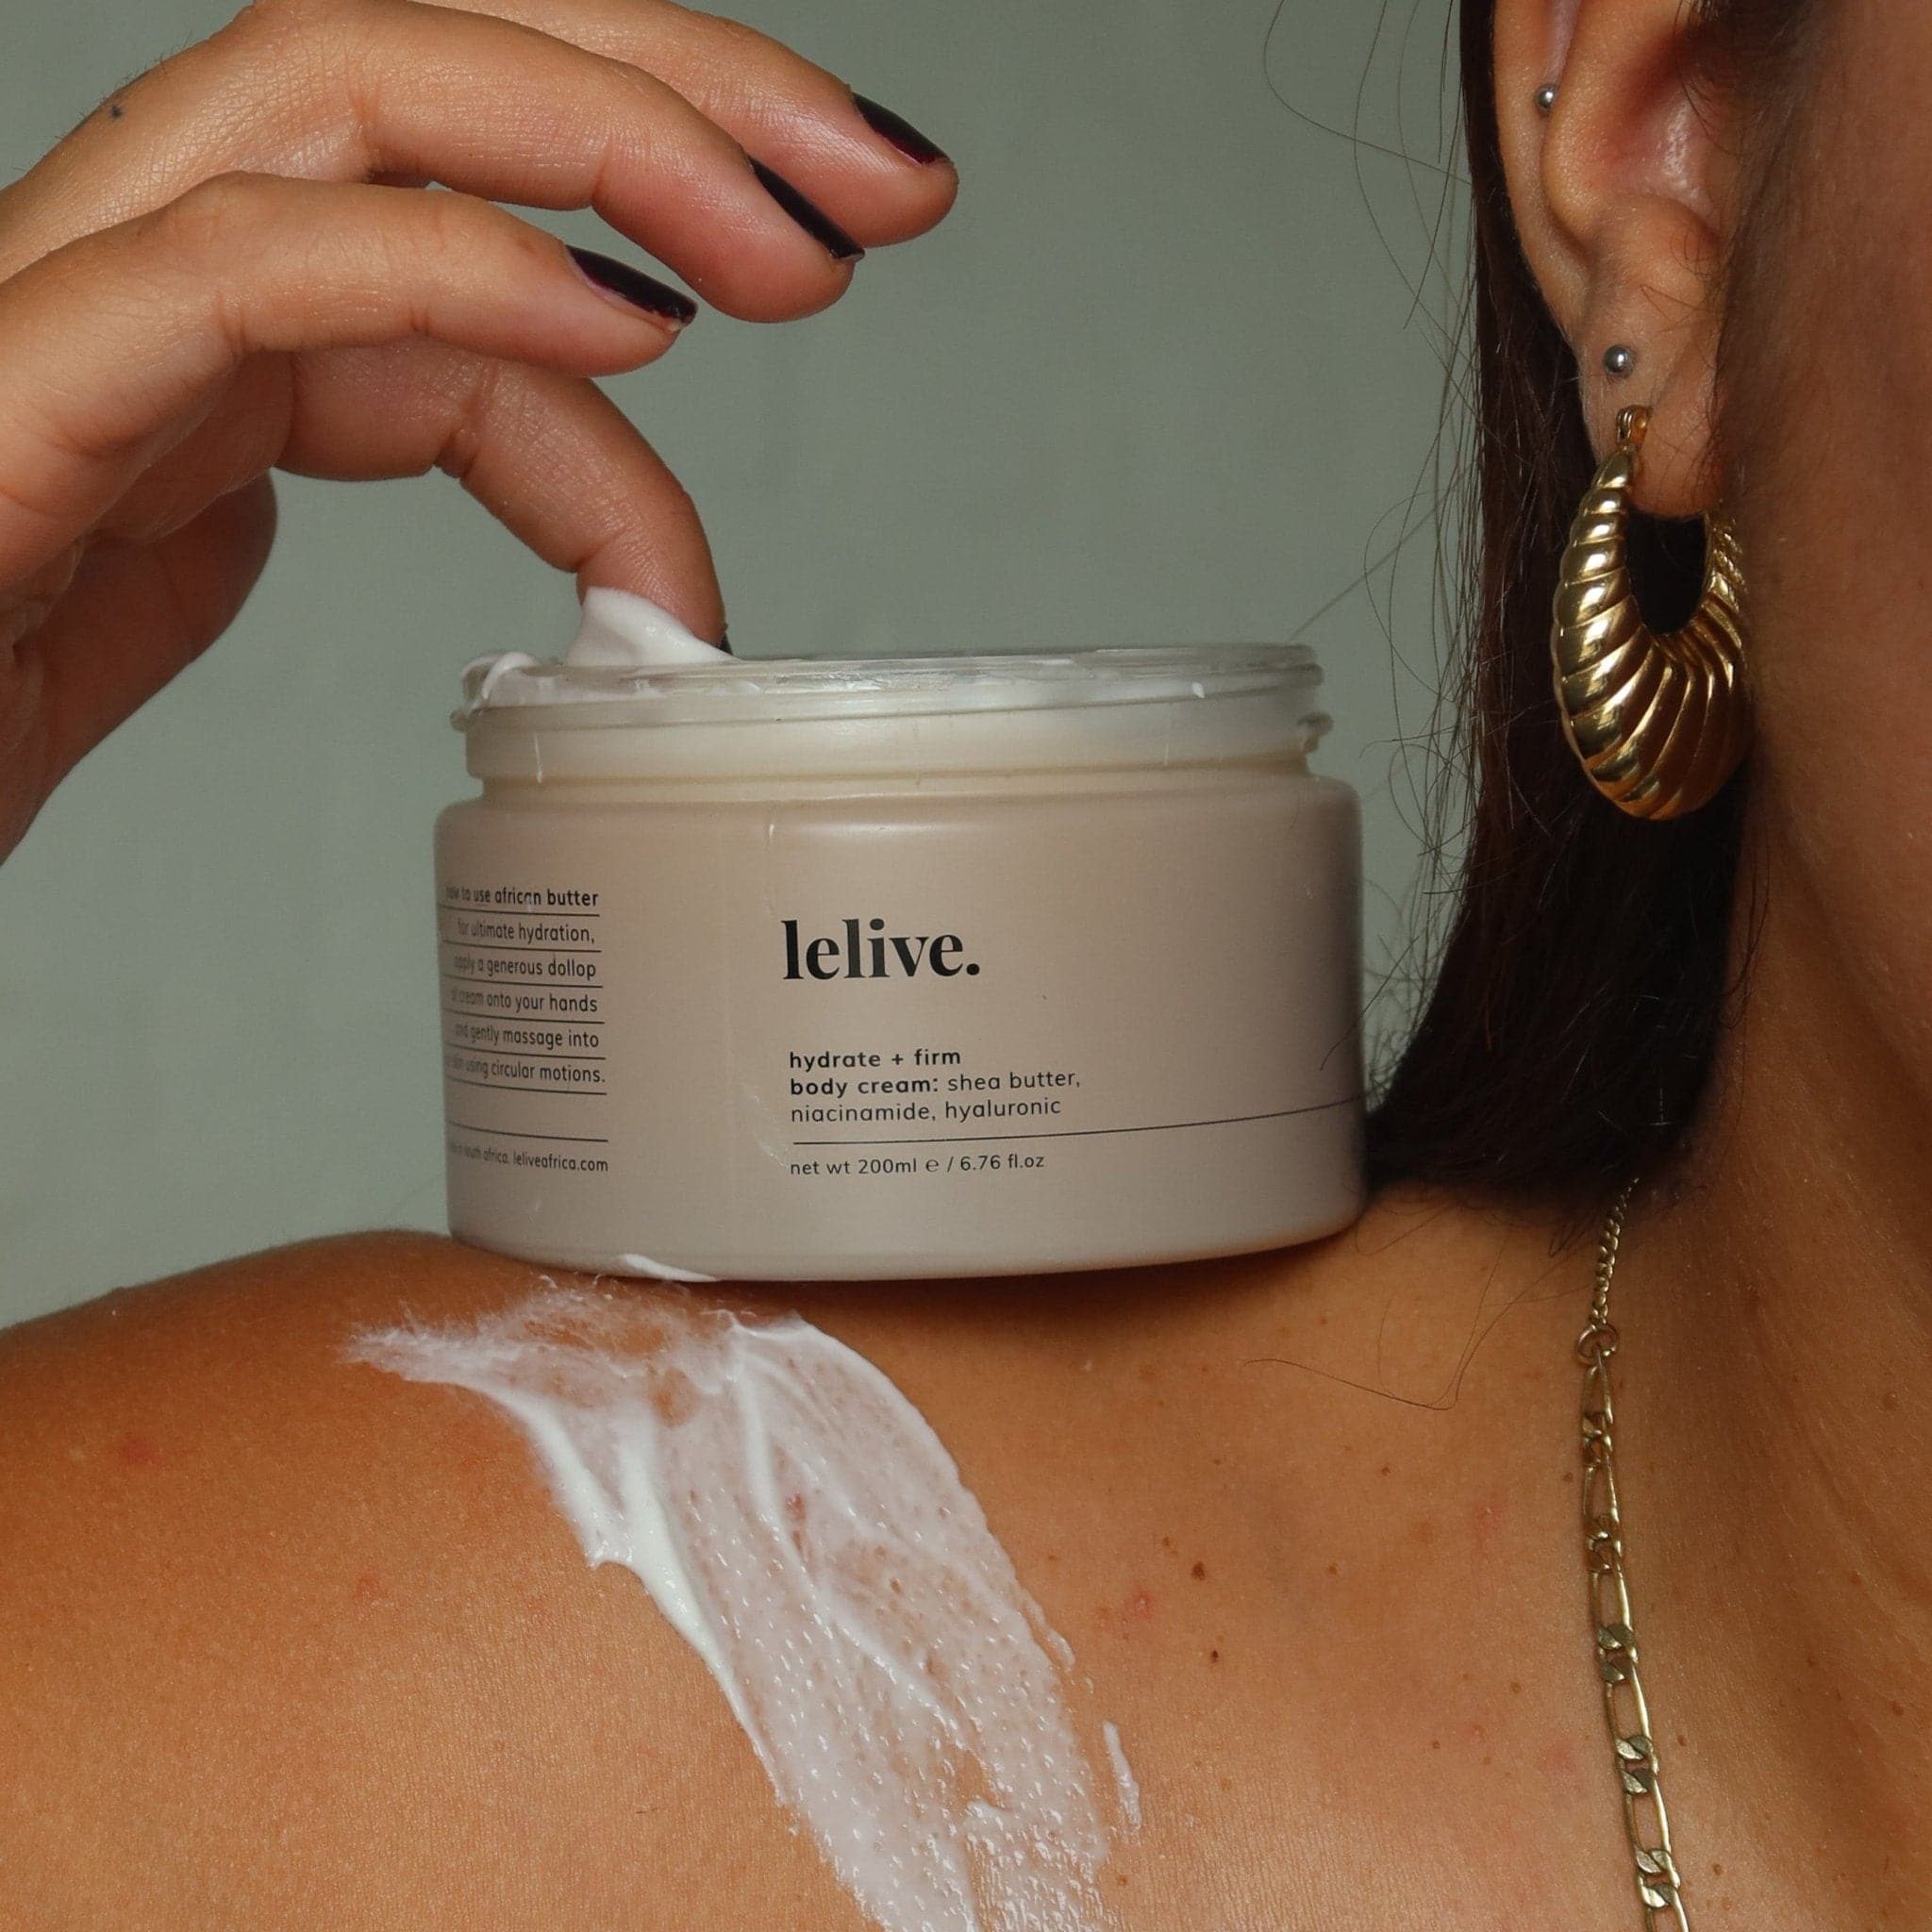 african butter | hydrate + firm body cream - lelive